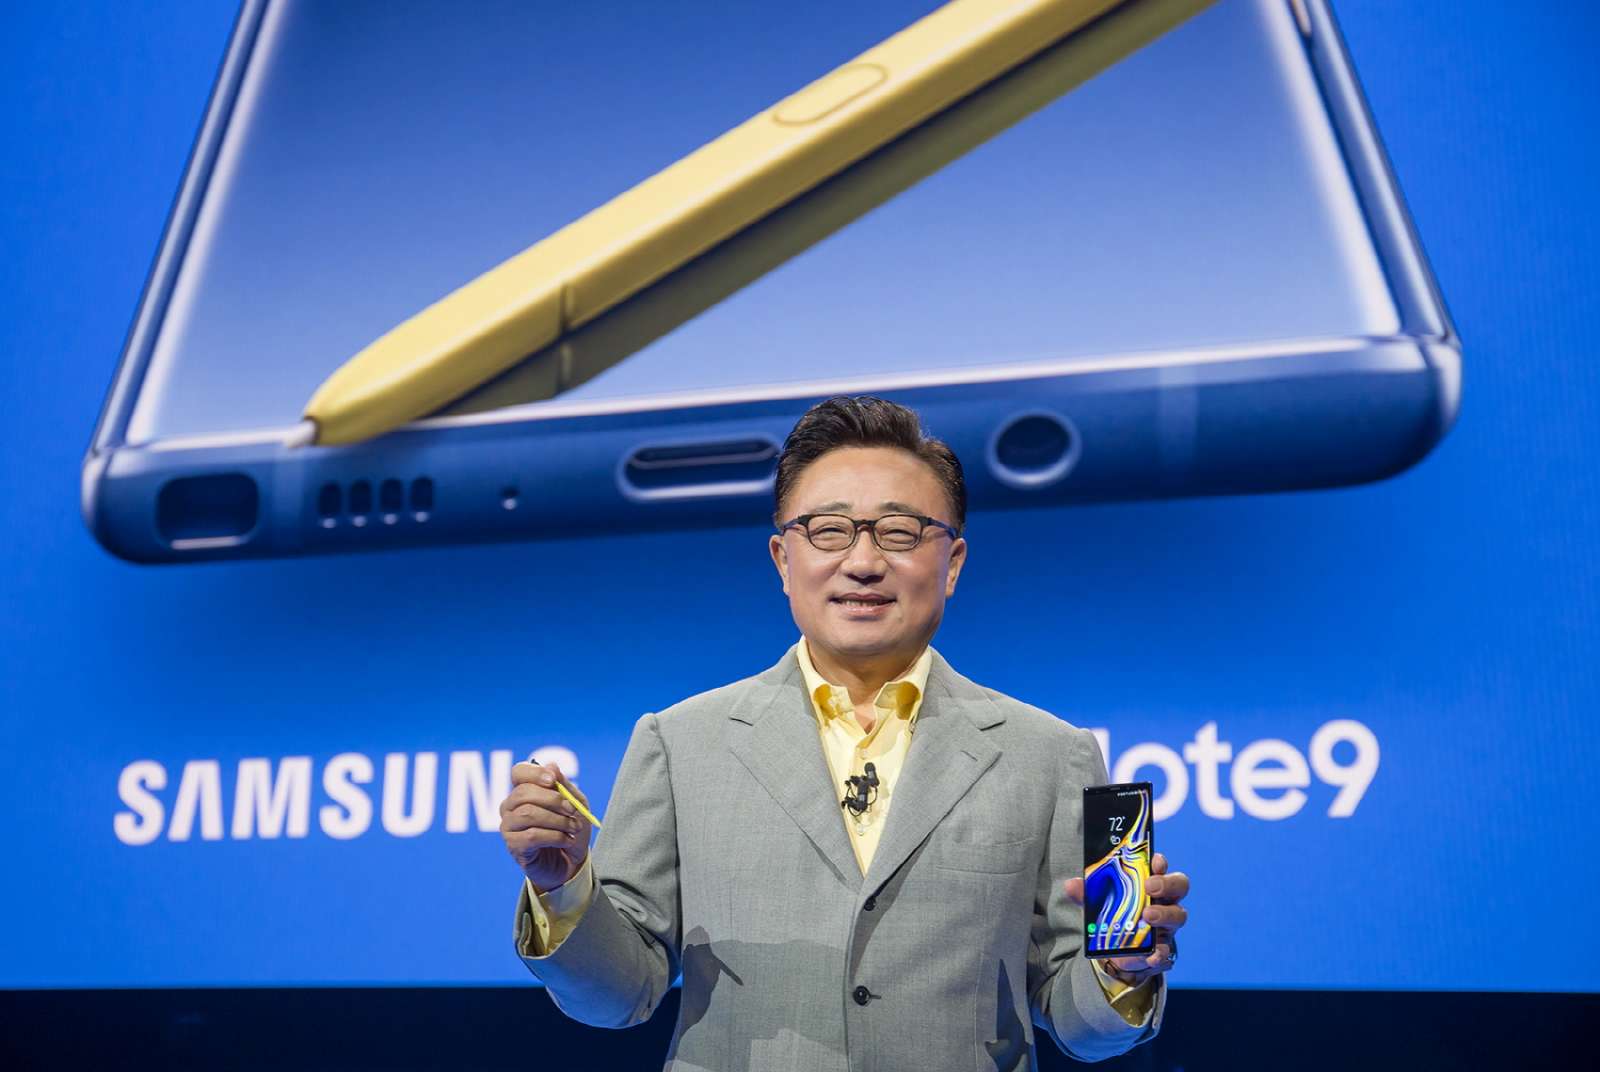 Samsung CEO DJ Koh presents the Galaxy Note 9 at the Samsung Galaxy Unpacked 2018 event